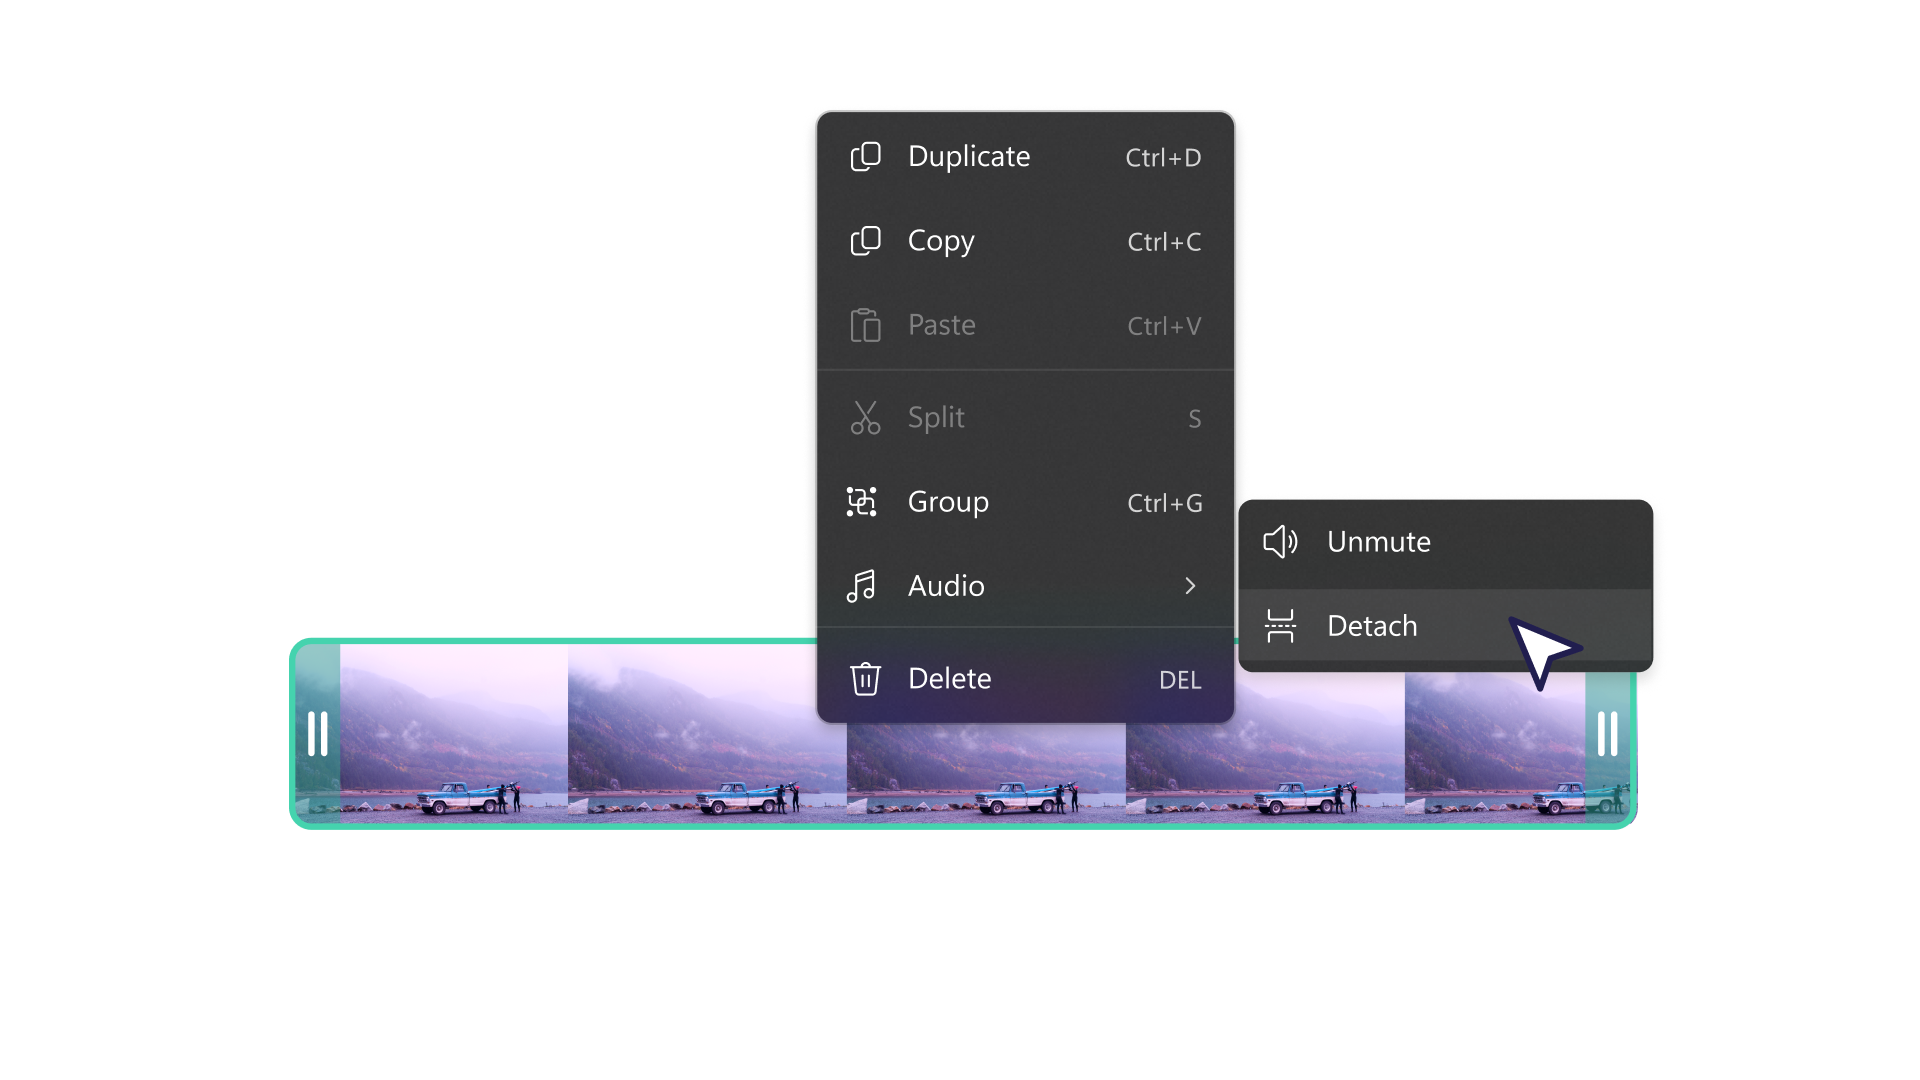 An image of selecting media and revealing the shortcuts to mute and detach audio